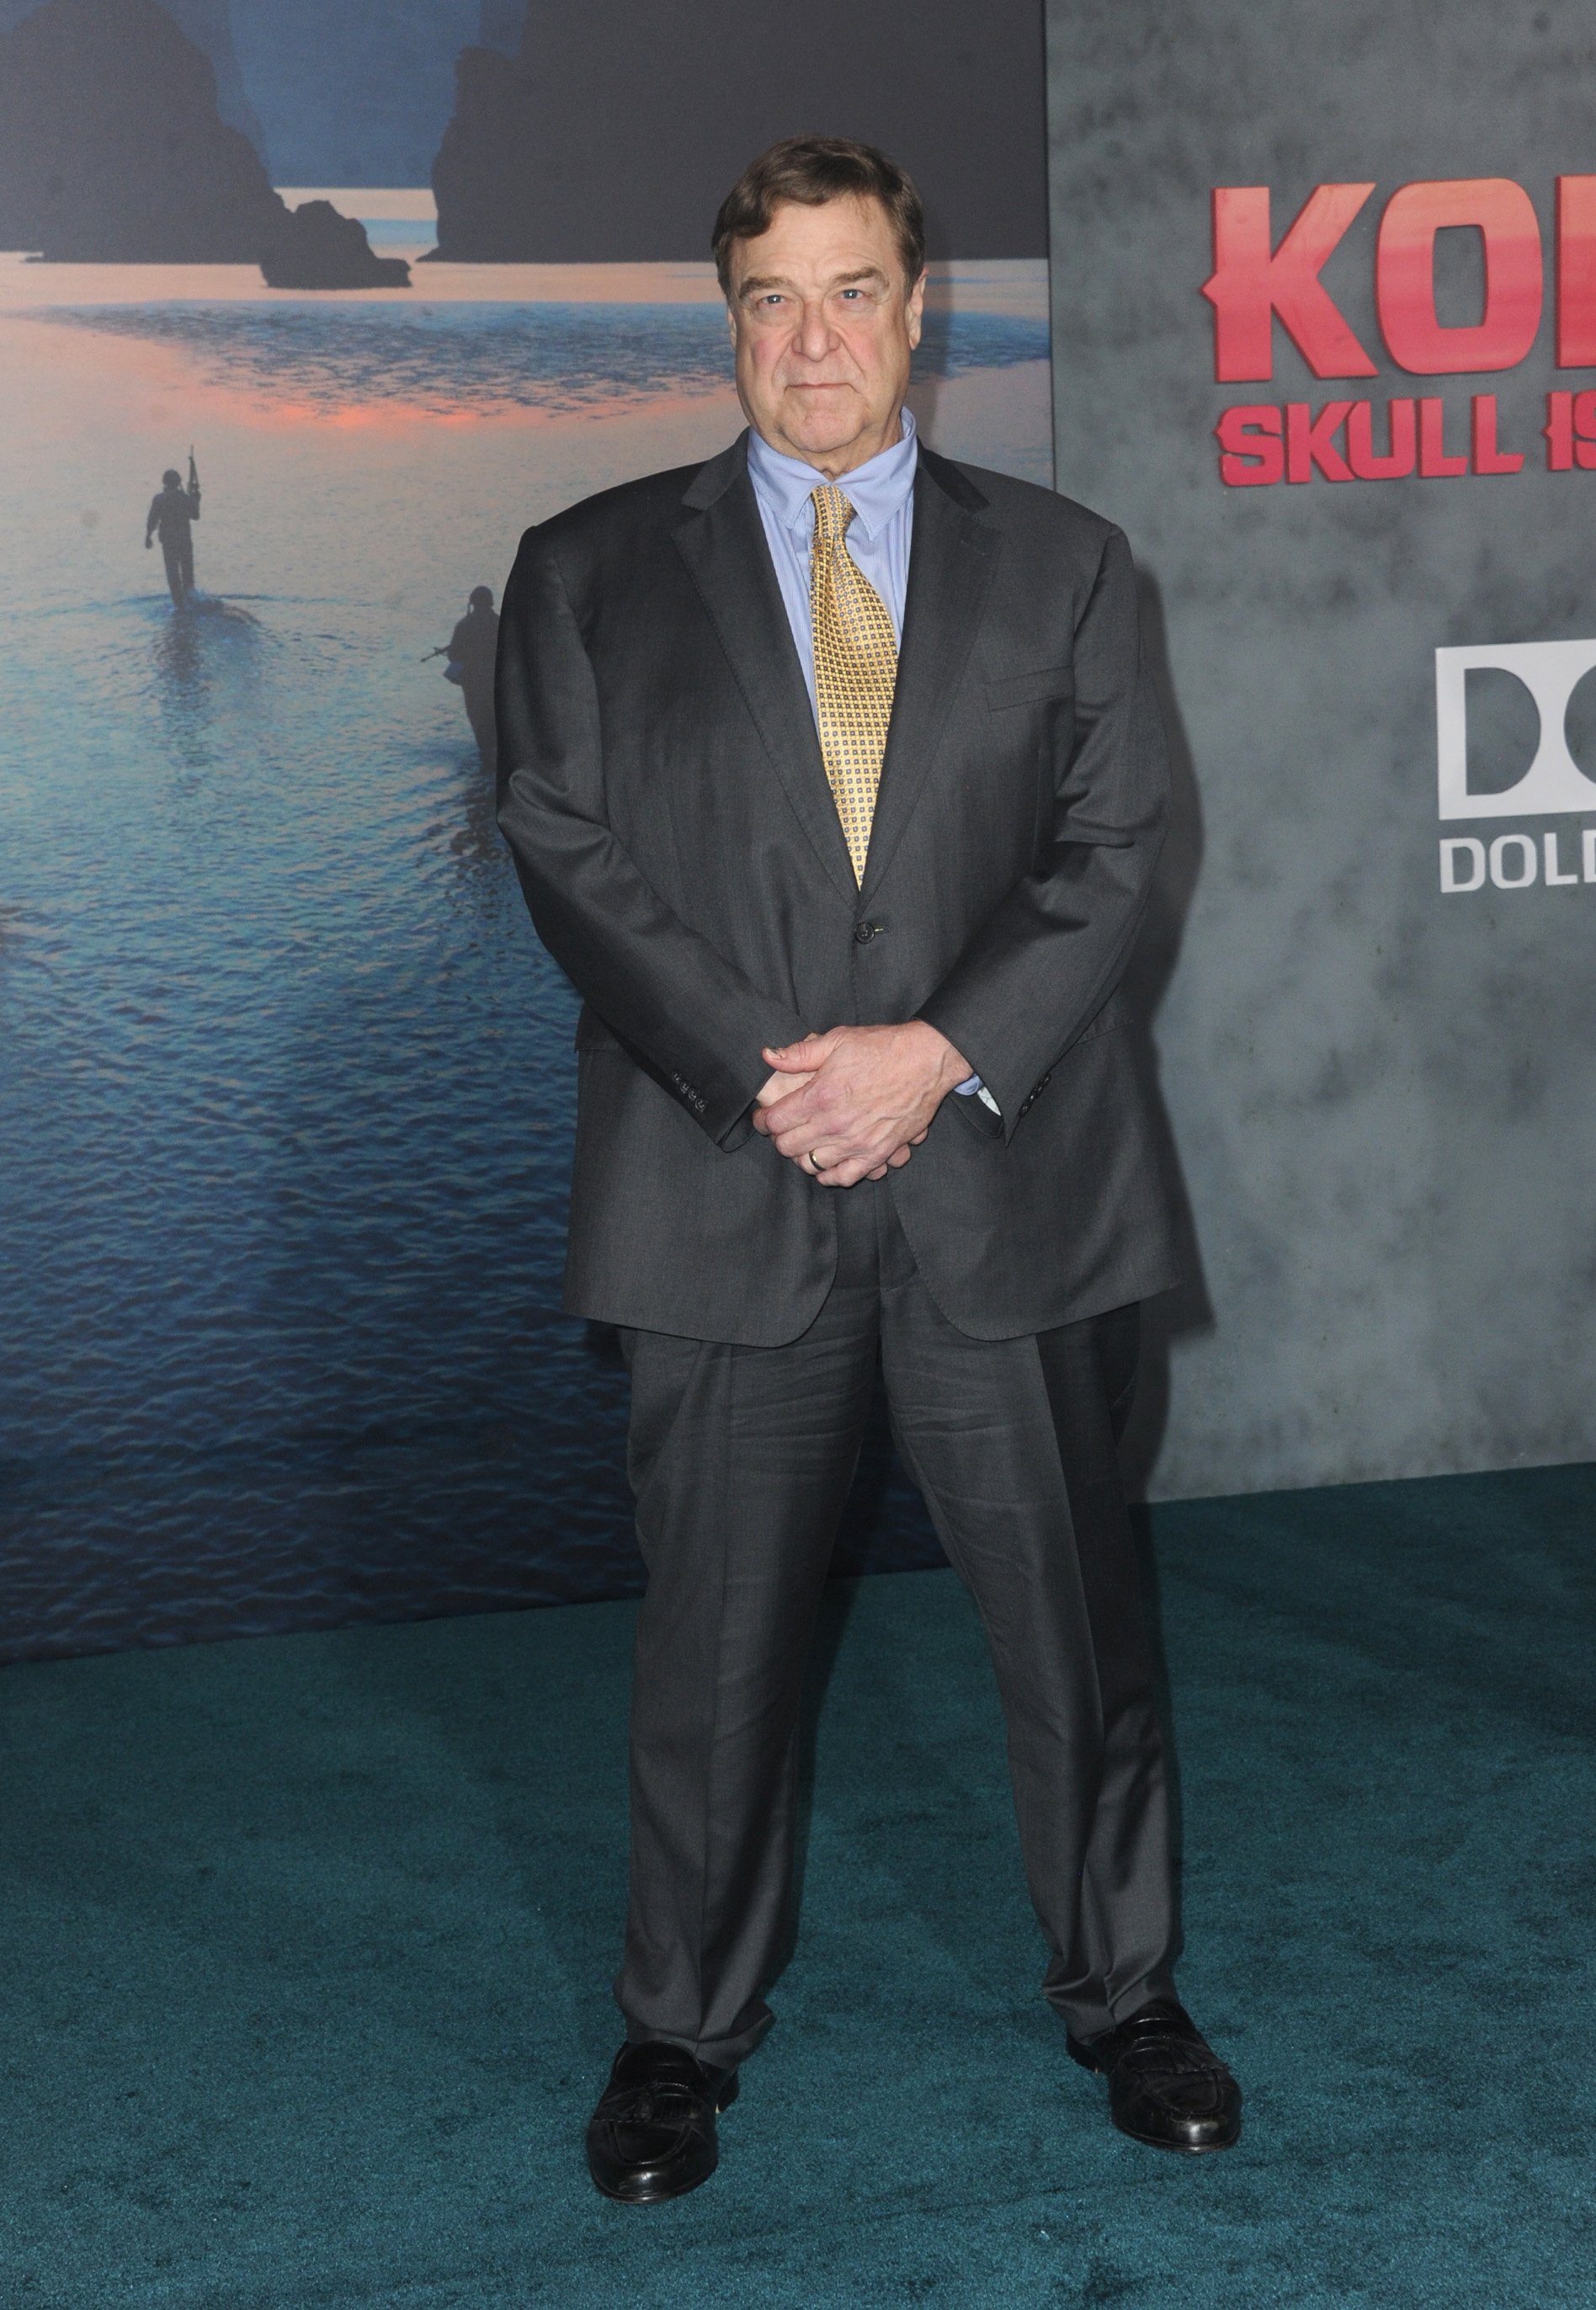 John Goodman at the premiere of "Kong: Skull Island" on March 8, 2017 | Source: Getty Images